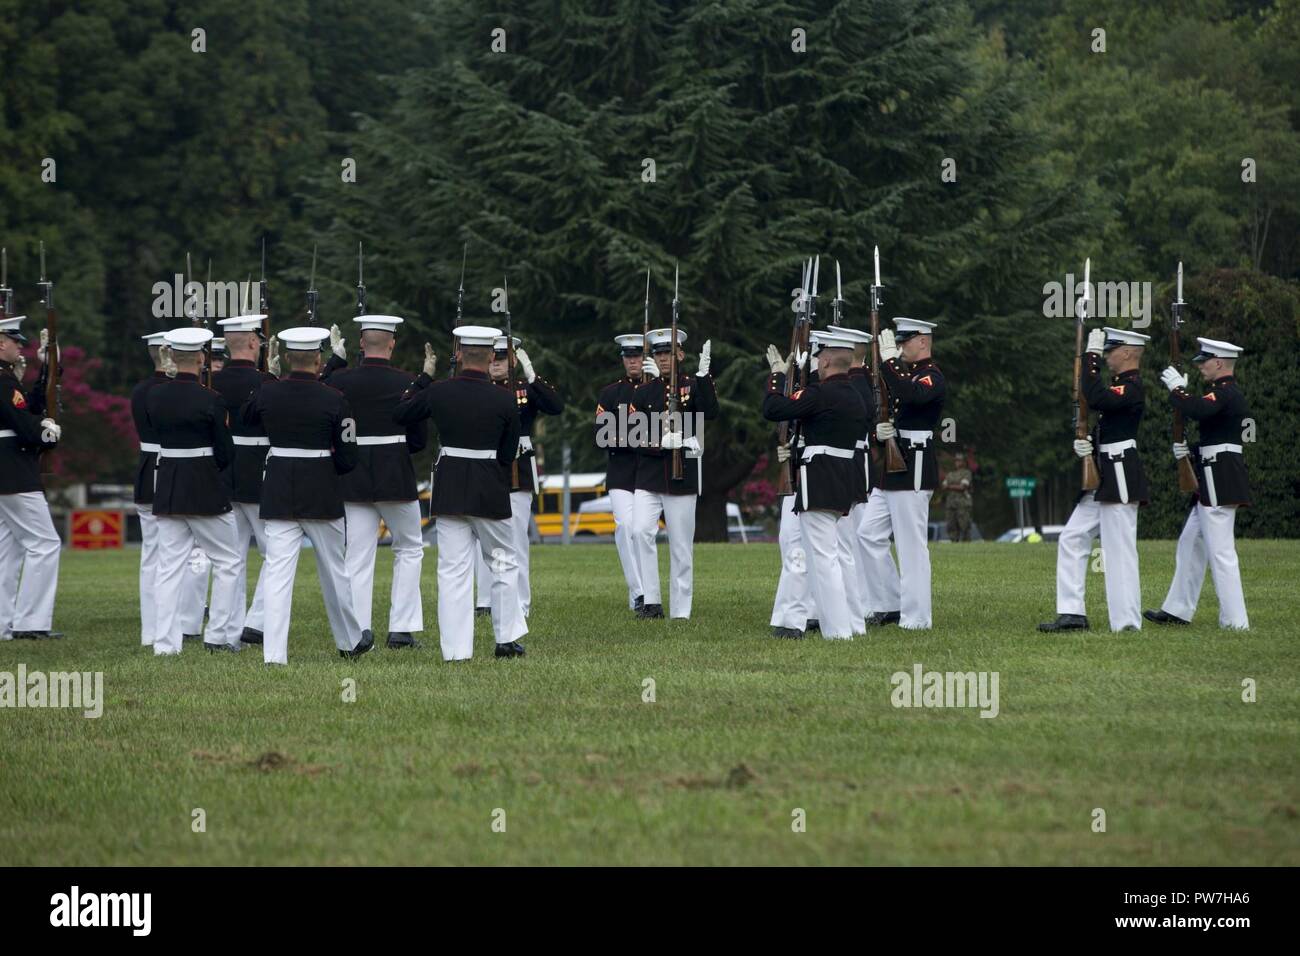 U.S. Marine Corps Silent Drill Platoon performs at the 35th annual United States Marine Corps’ Enlisted Awards Parade and Presentation on Marine Corps Base Quantico, Va., Sept. 20, 2017. The presentation is held to recognize individual achievements of enlisted Marines throughout the Marine Corps. Stock Photo